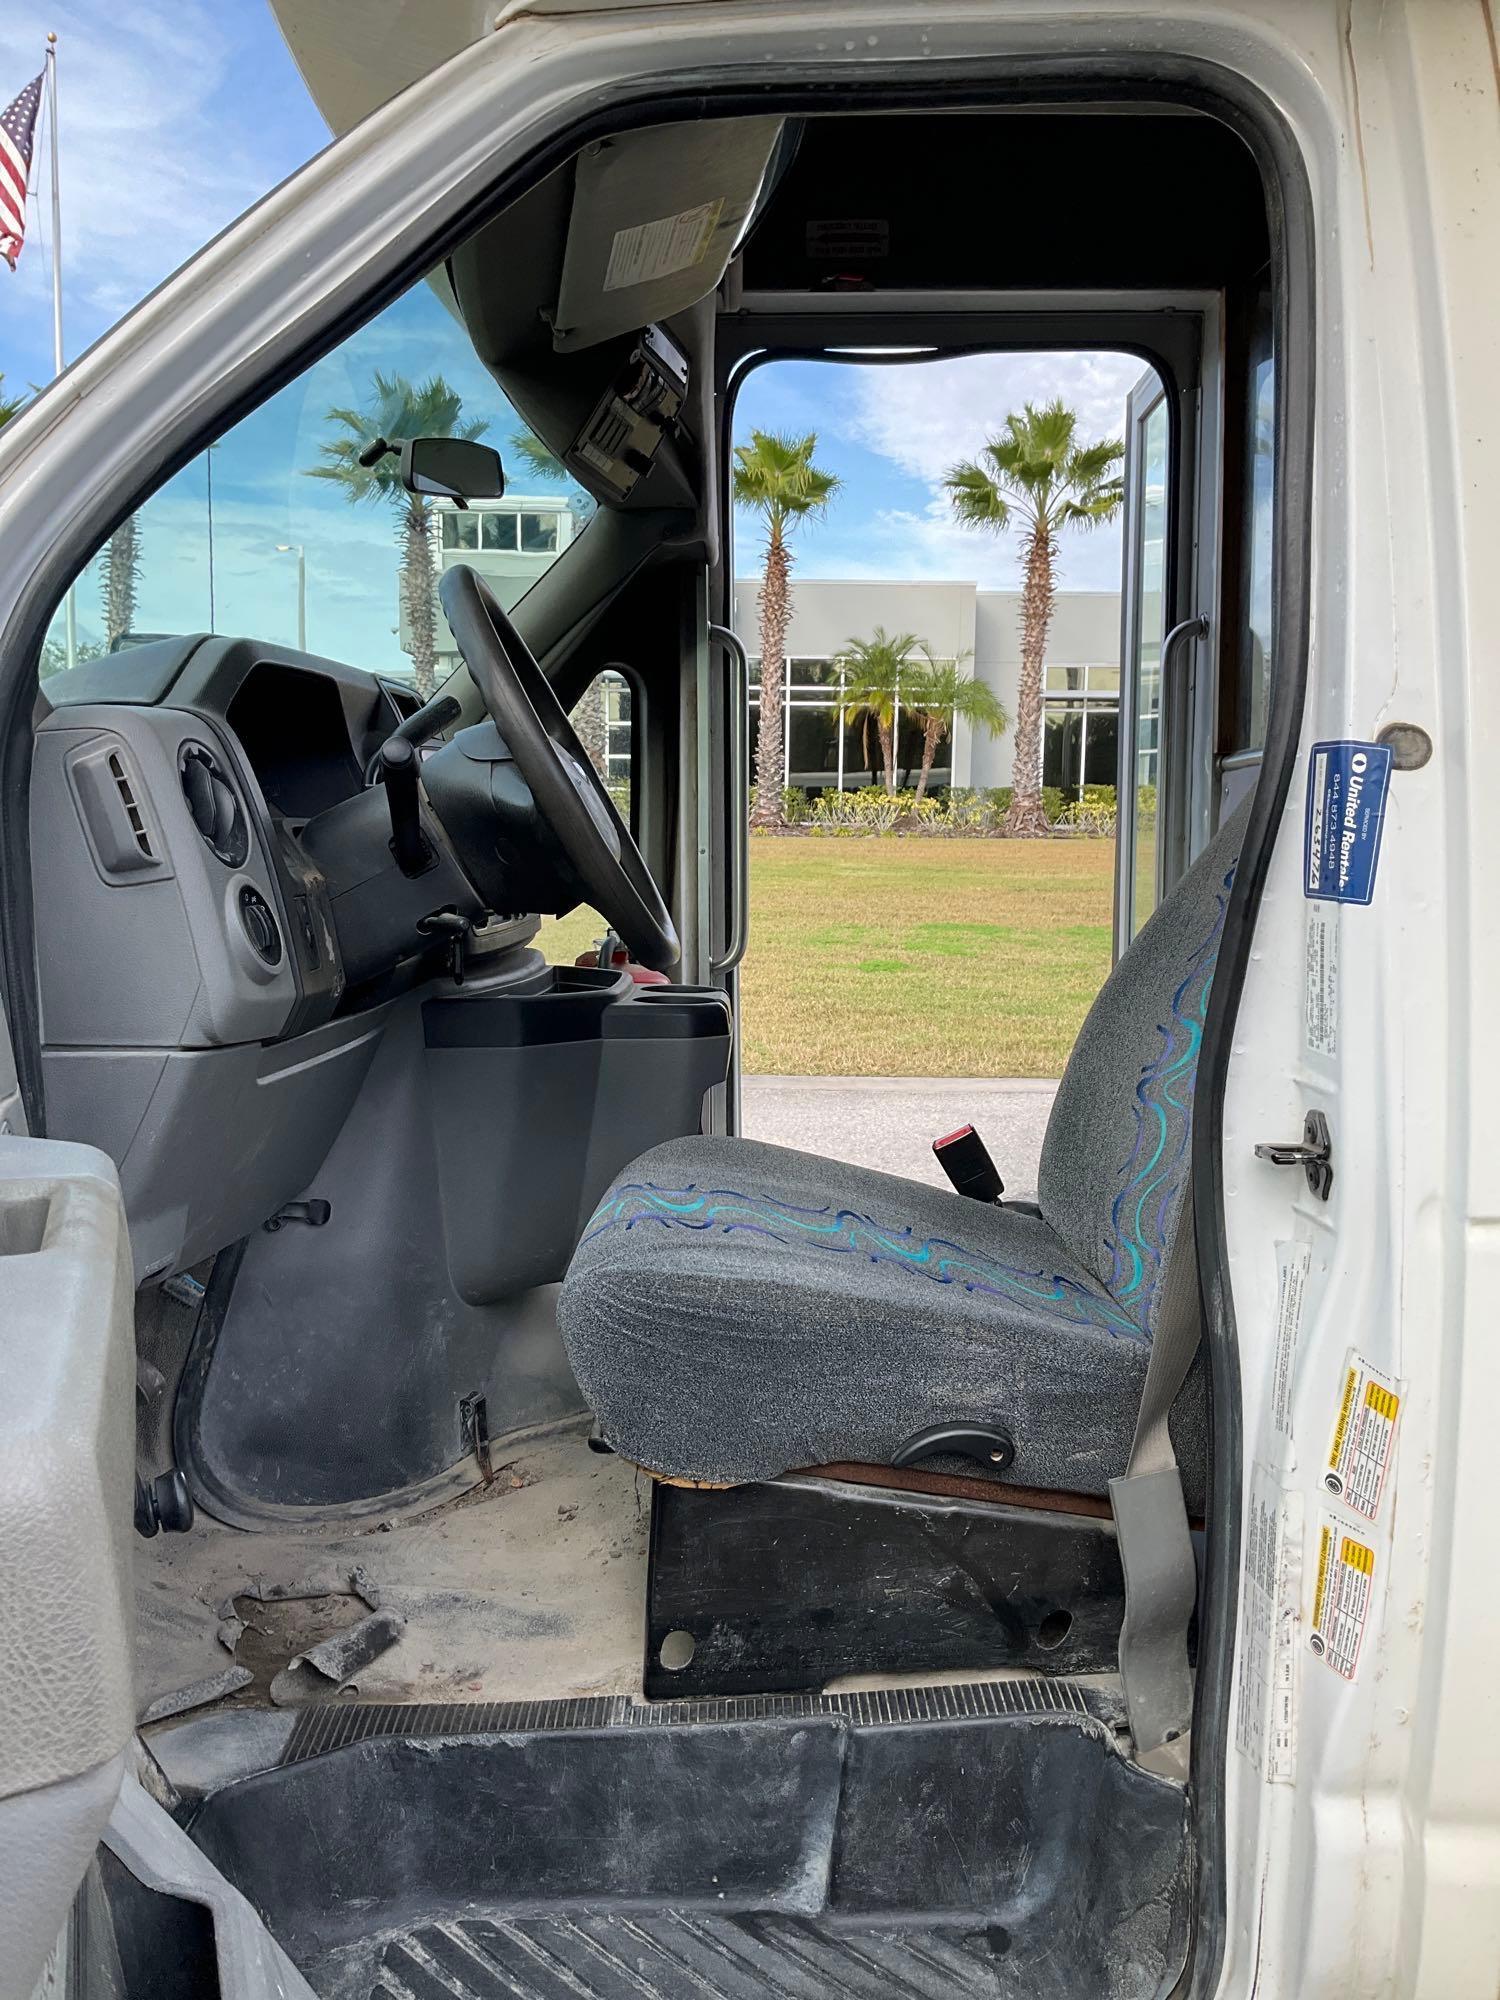 2018 FORD ECONOLINE 450 SHUTTLE BUS, GAS AUTOMATIC, 28 PASSENGER SEATING